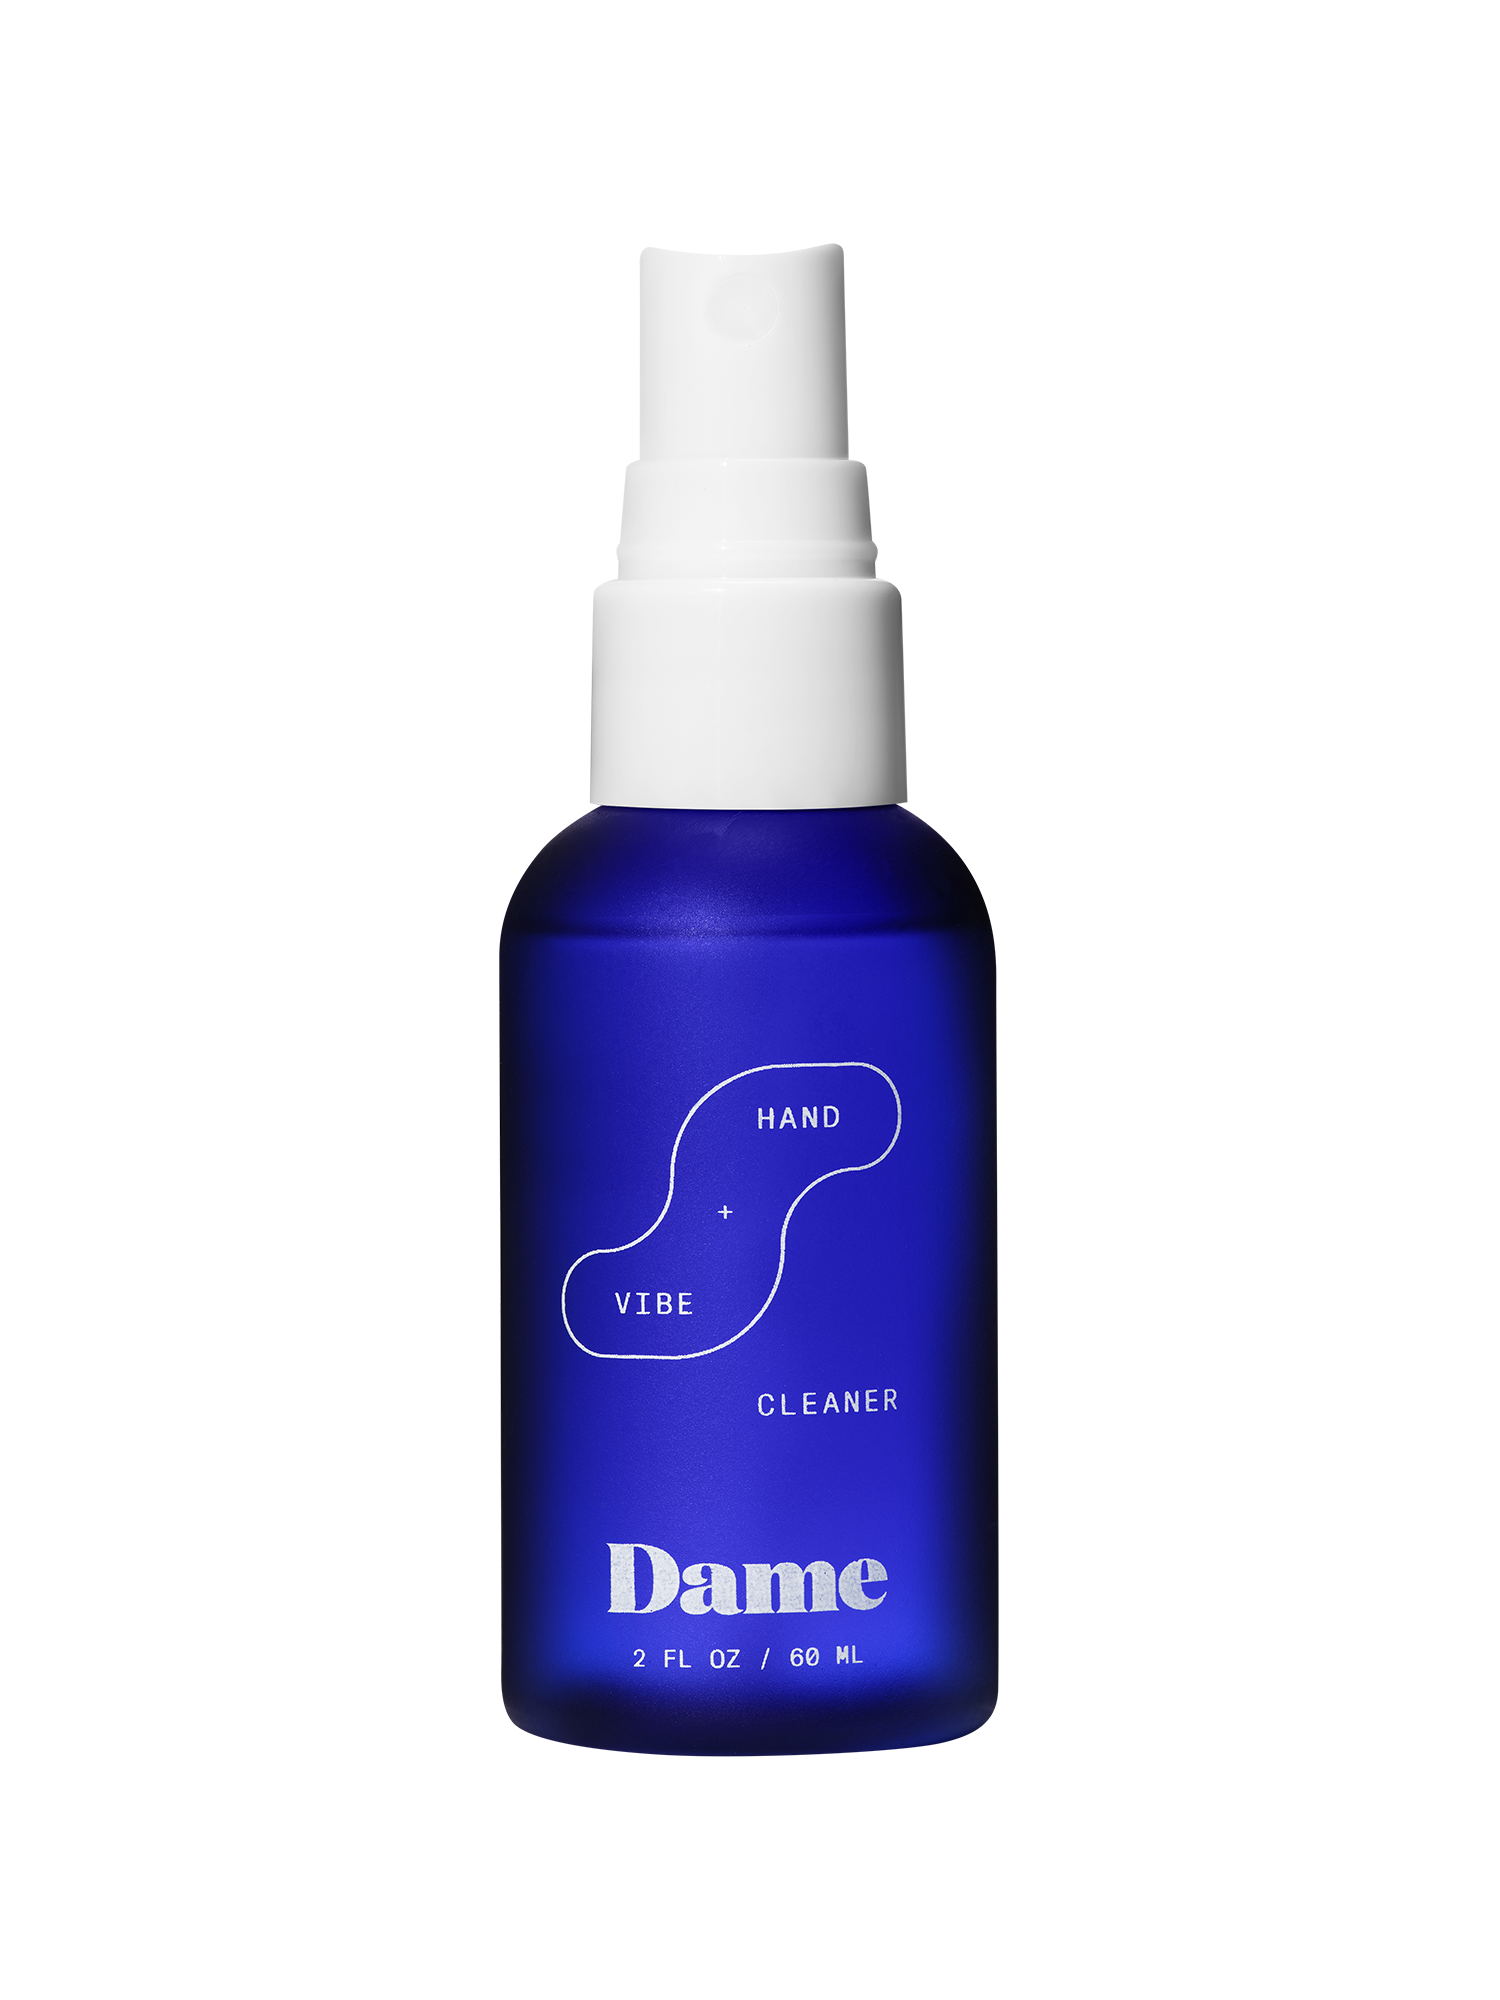 Hand + Vibe Cleaner | Seamless | Ablue 2floz bottle with Dame's bright blue logo on beige background.